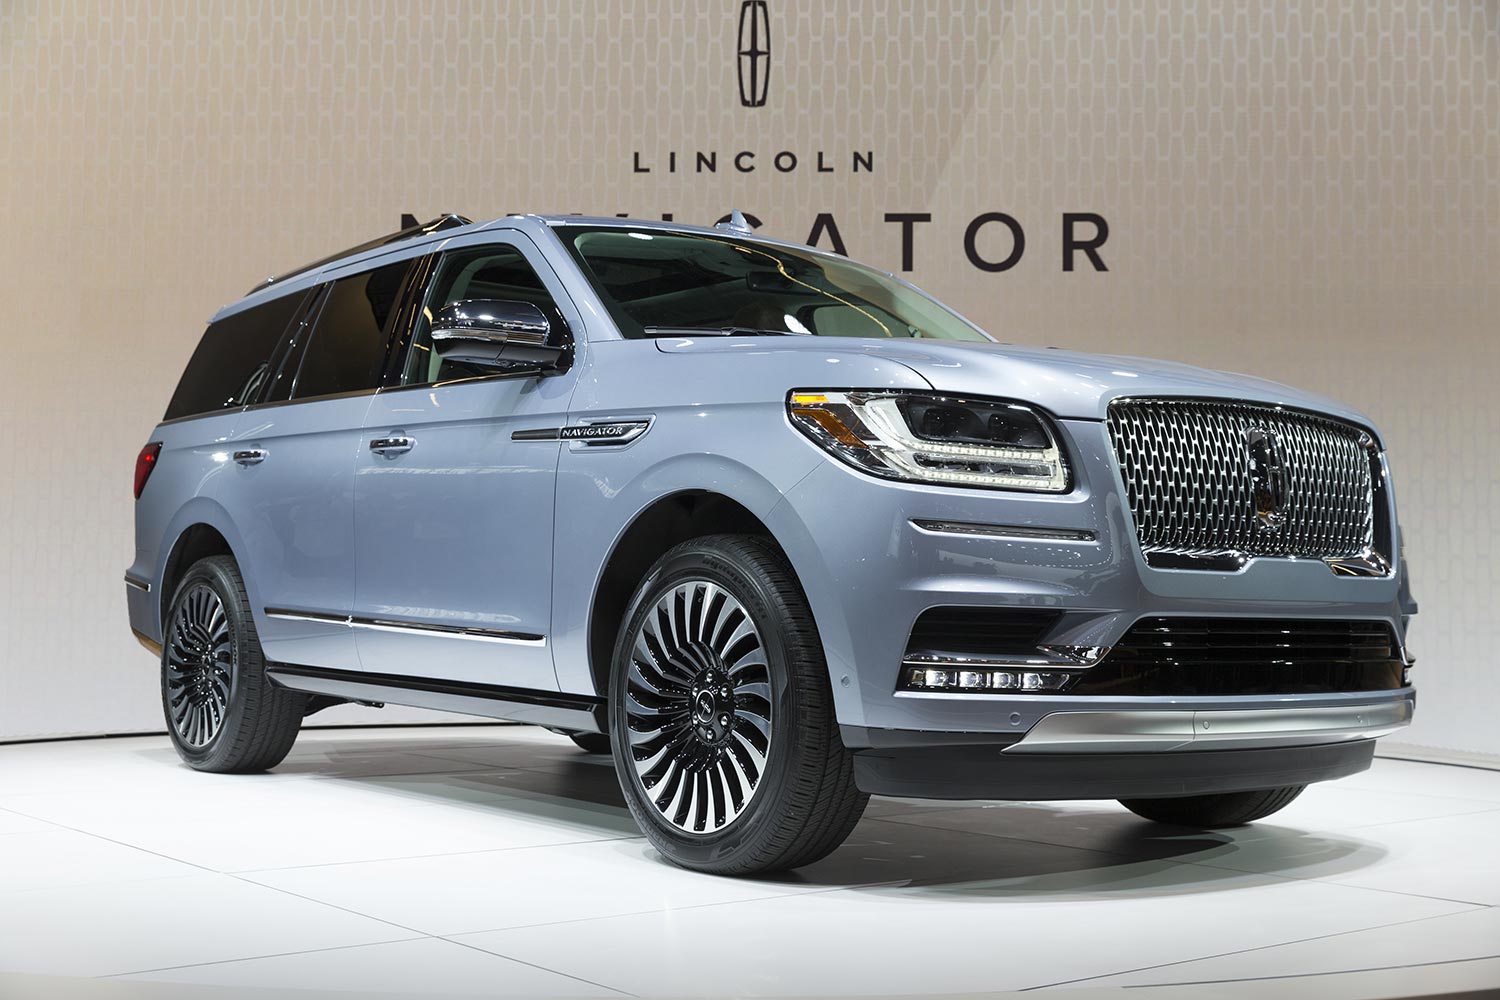 Lincoln Navigator concept car unveiled at New York International Auto Show